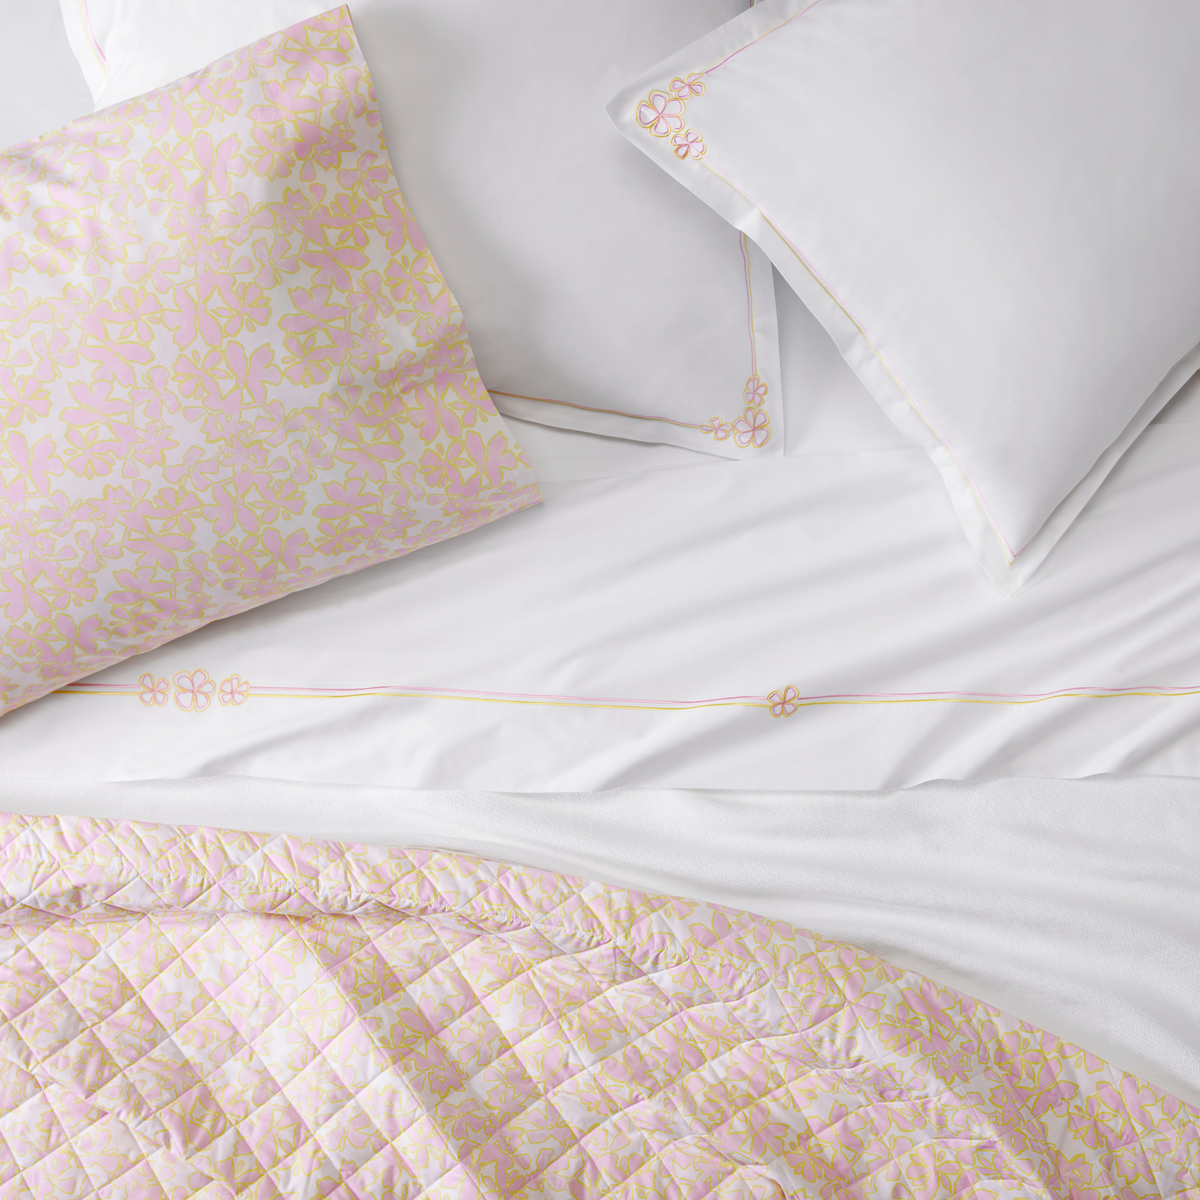 Sferra Prato Bedding Lifestyle with Fiorino Shams and Sheets Carnation